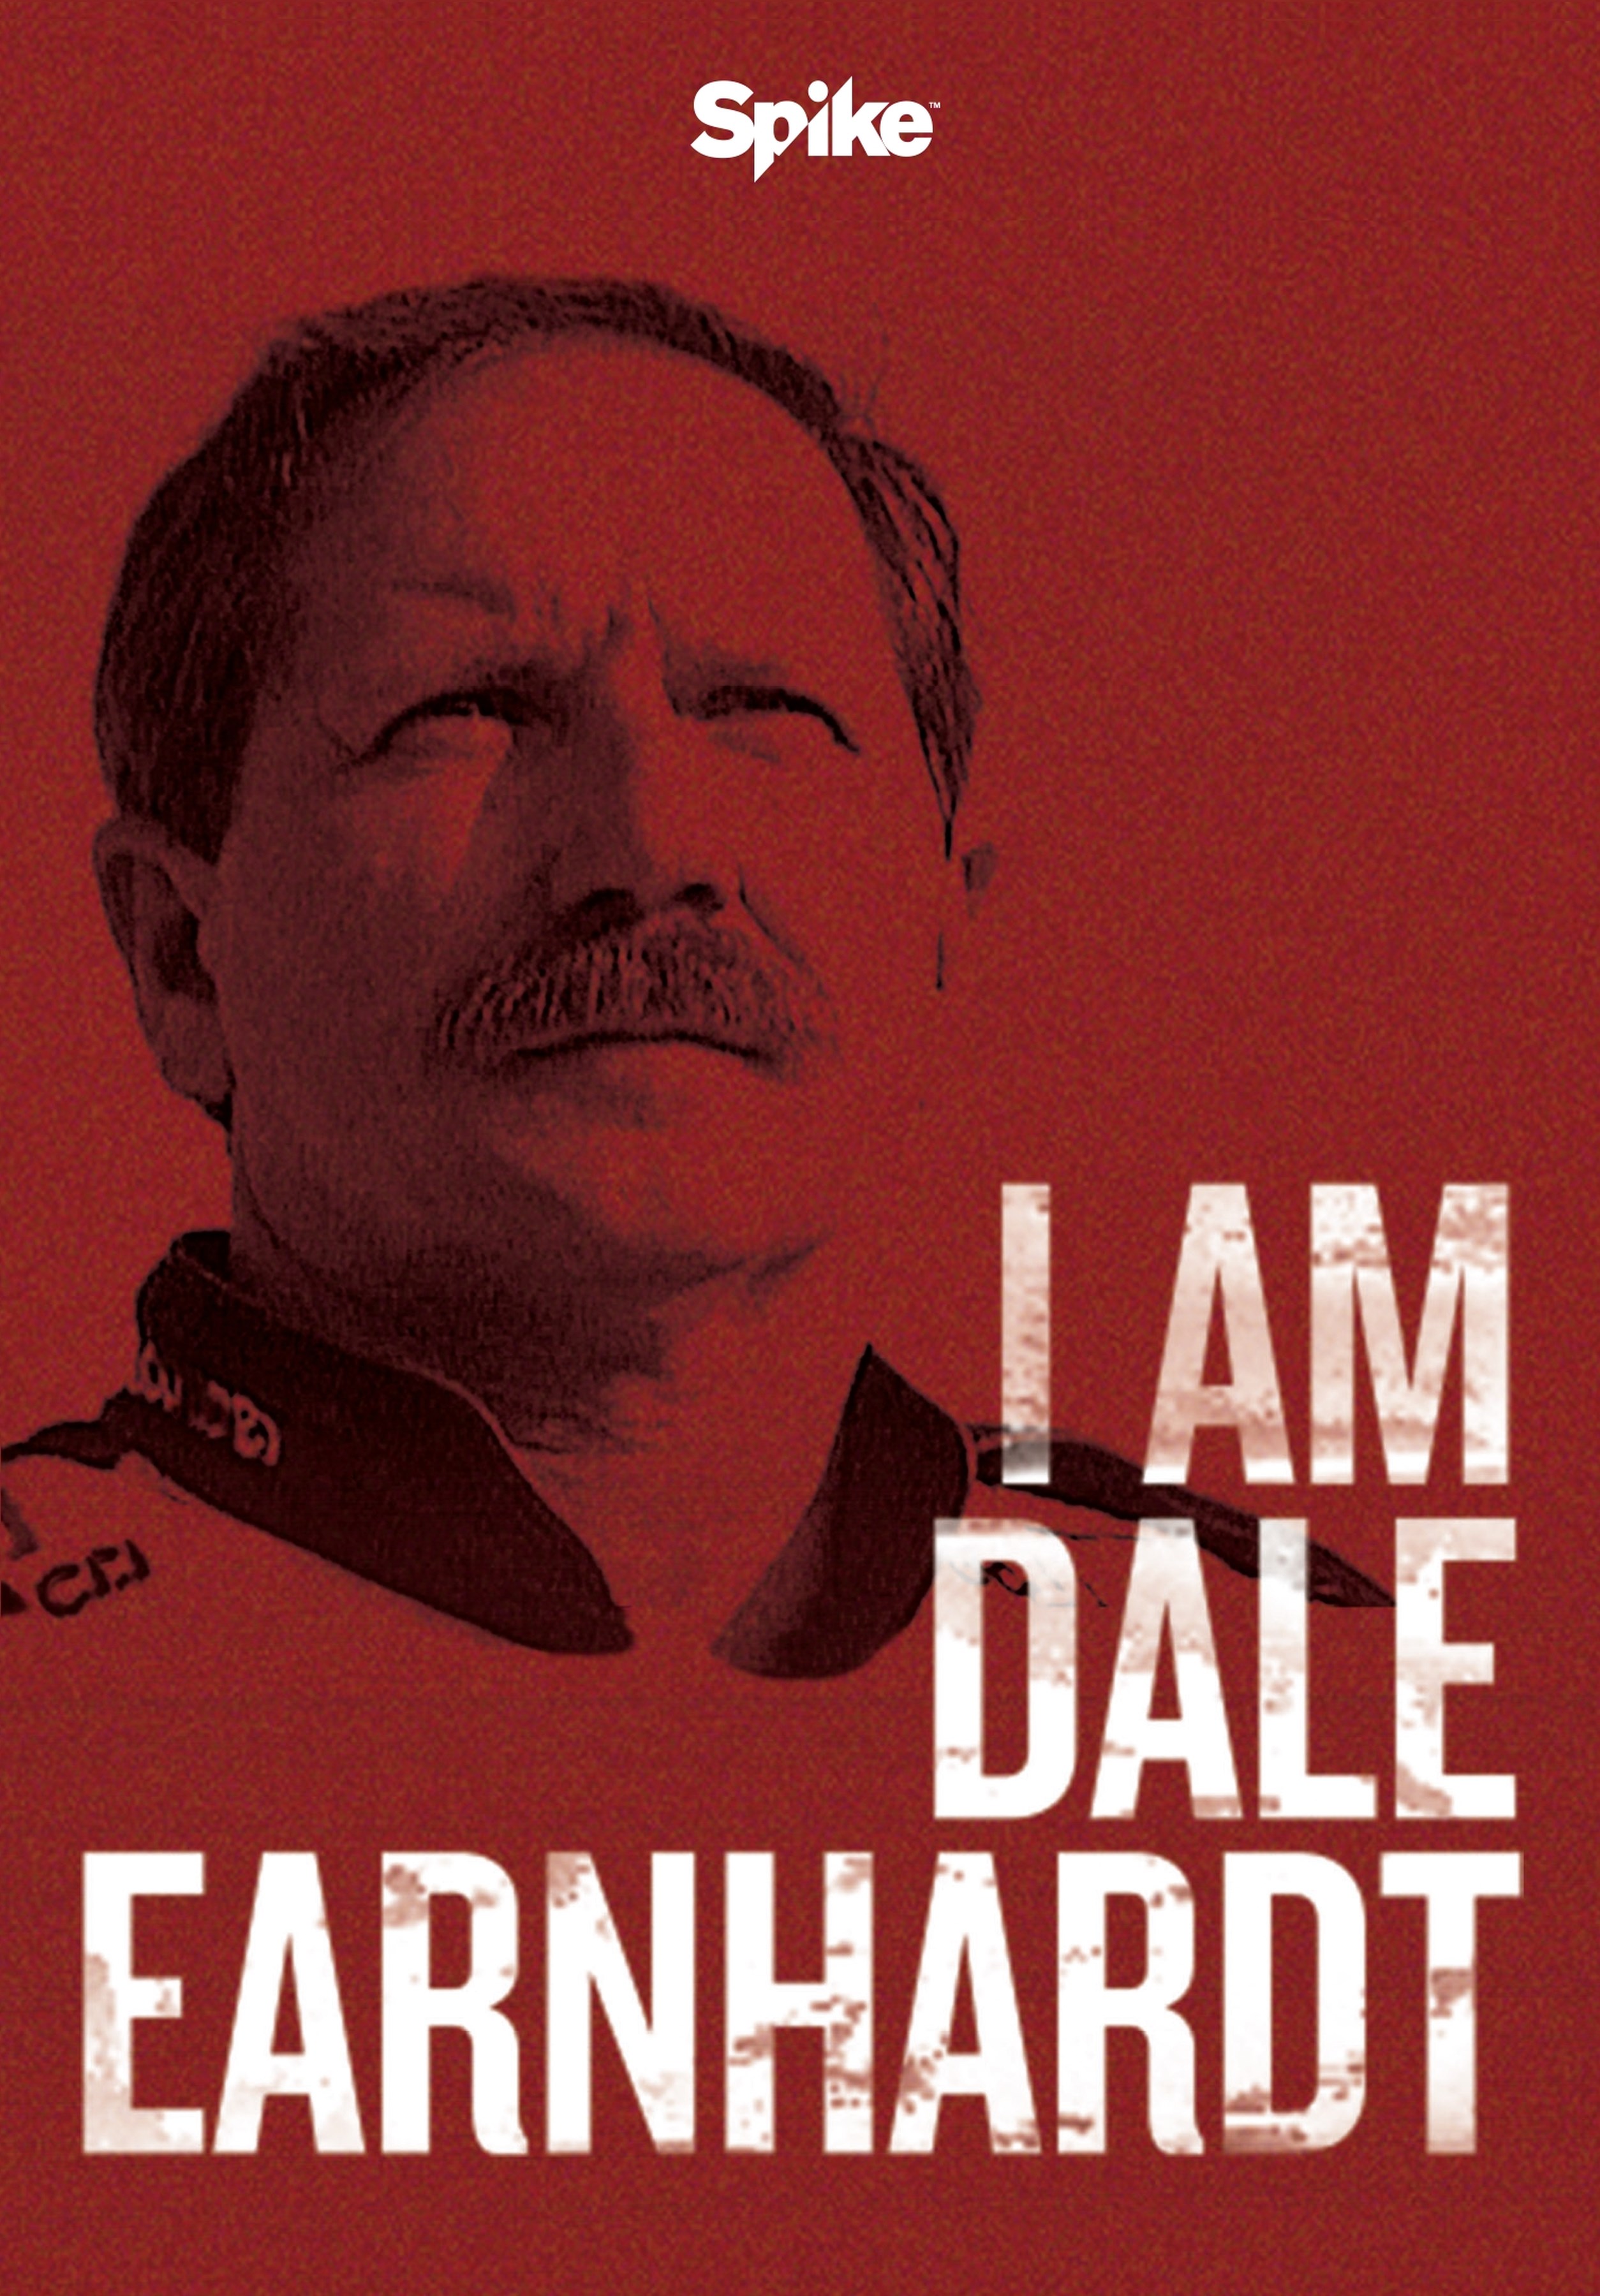 I am Dale Earnhardt DVD Review